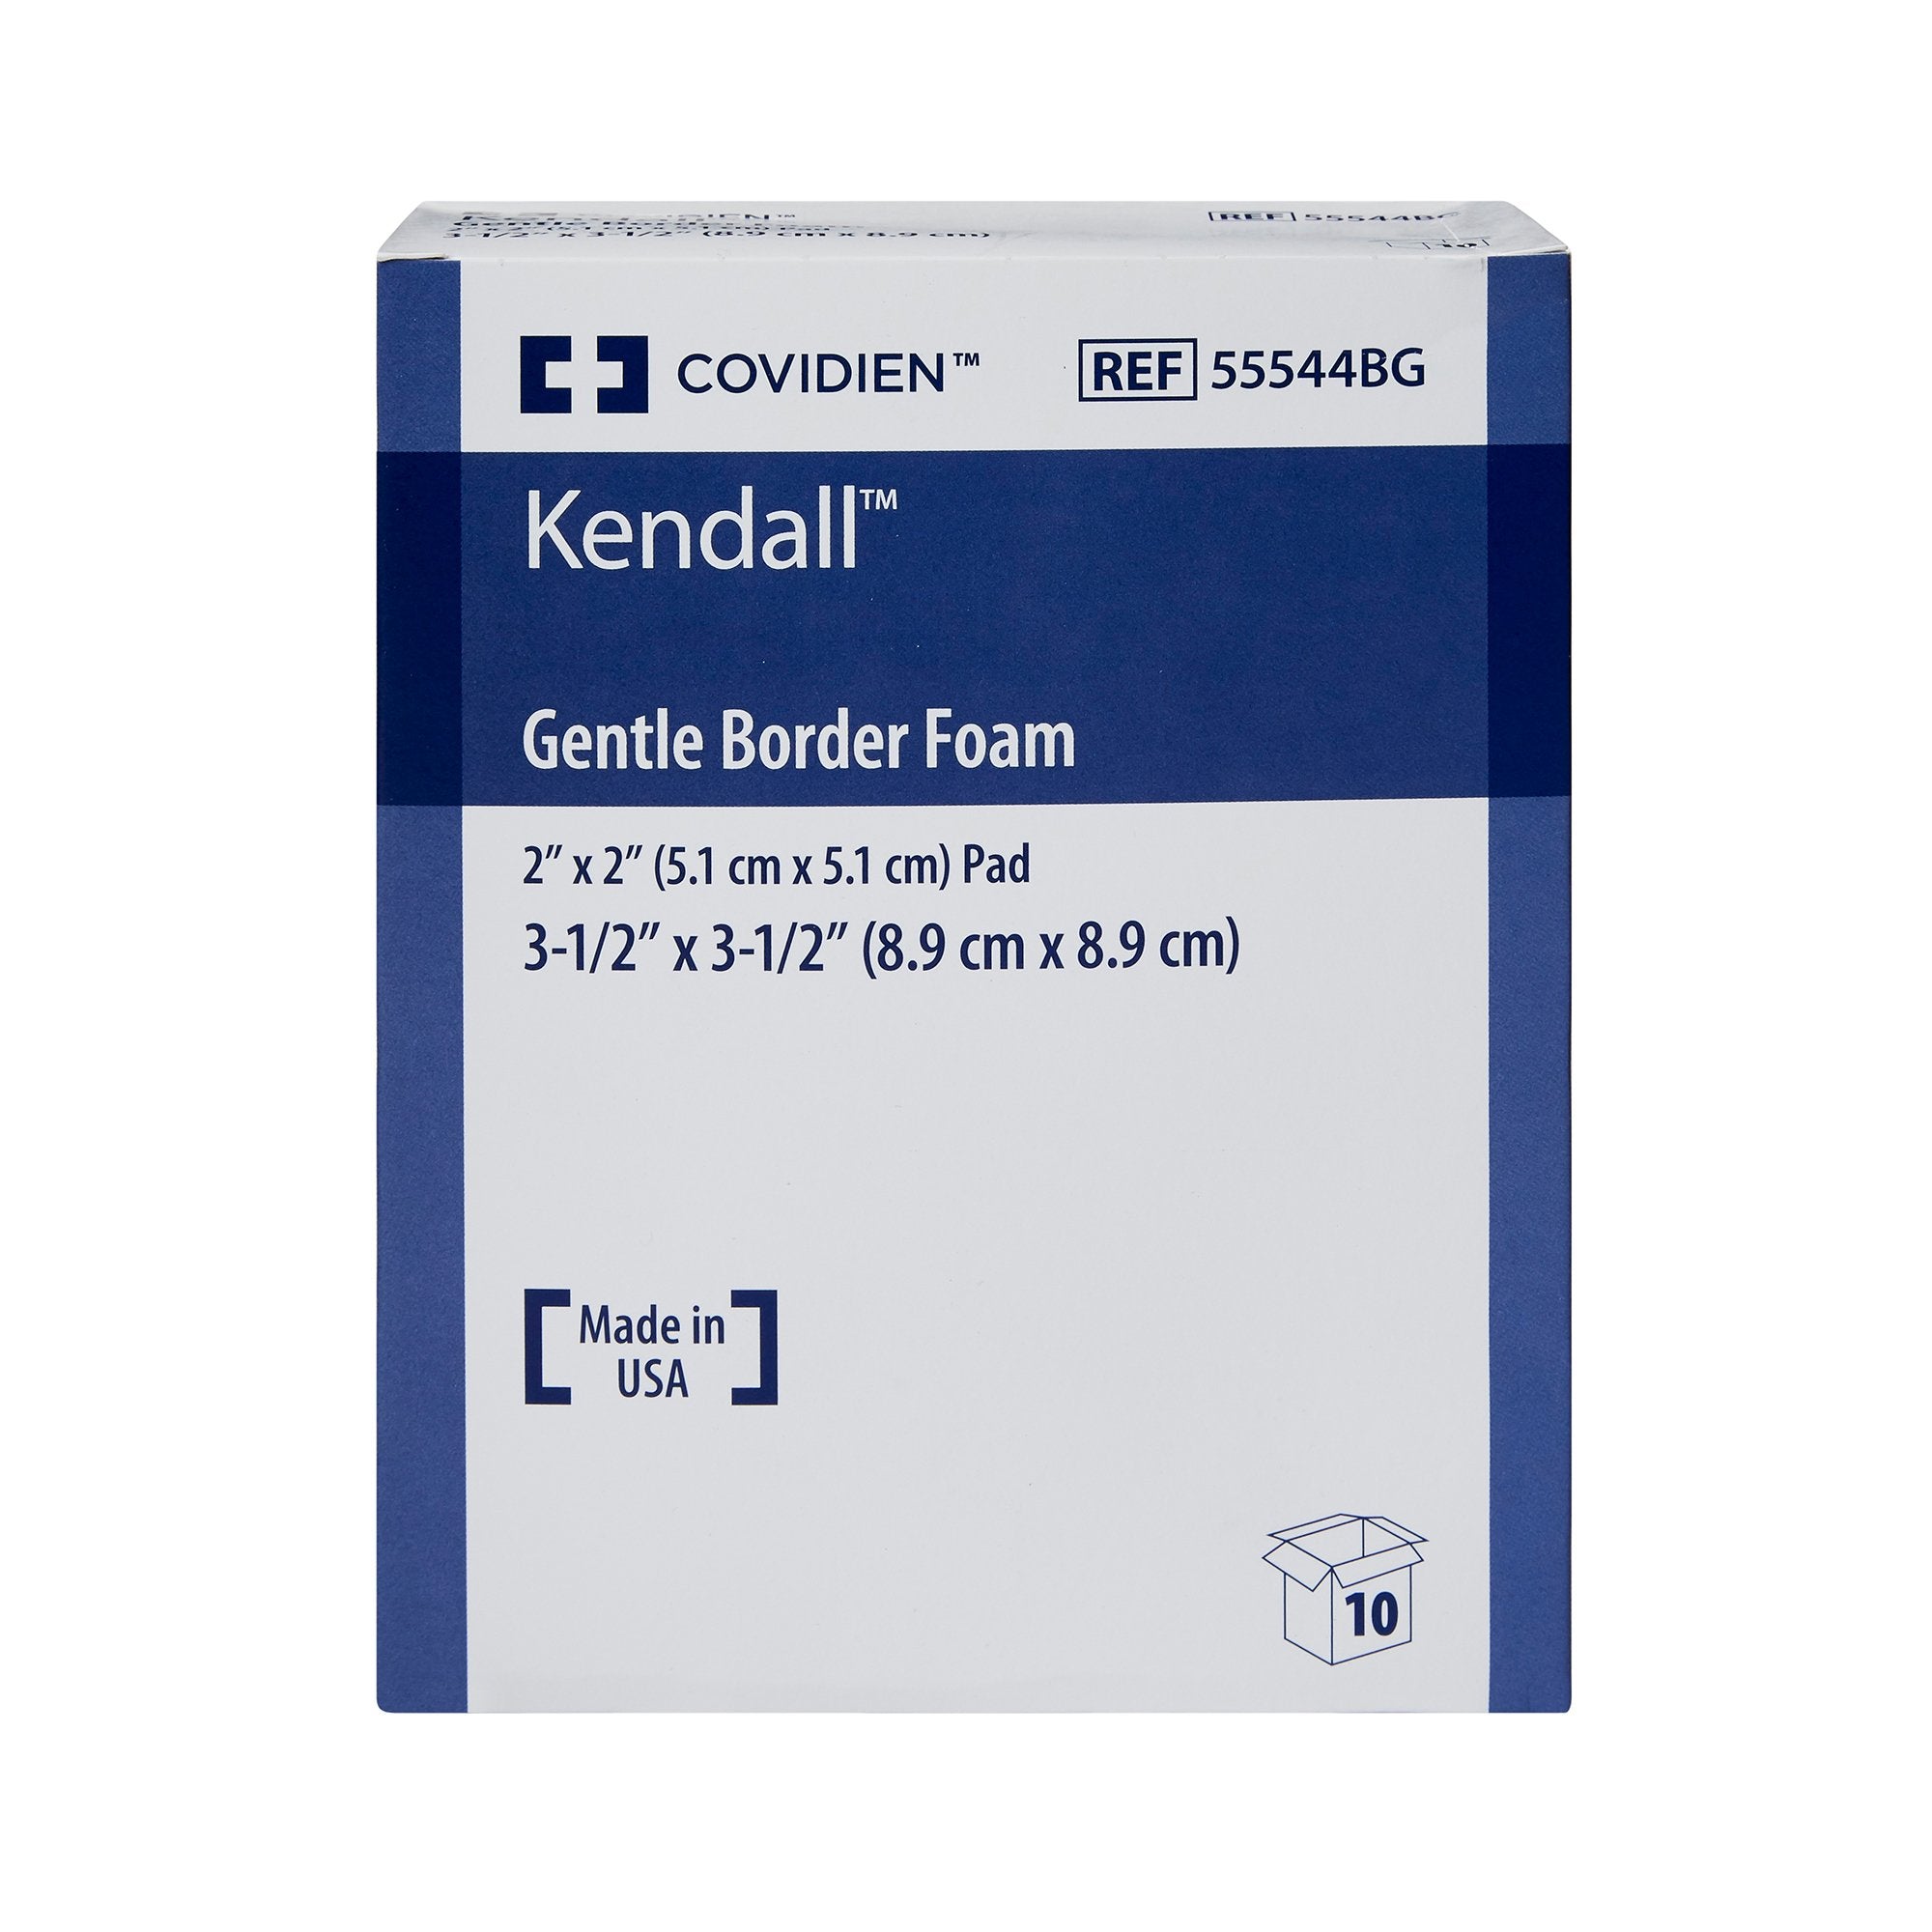 Foam Dressing Kendall™ Border Foam Gentle Adhesion 3-1/2 X 3-1/2 Inch With Border Film Backing Silicone Adhesive Square Sterile